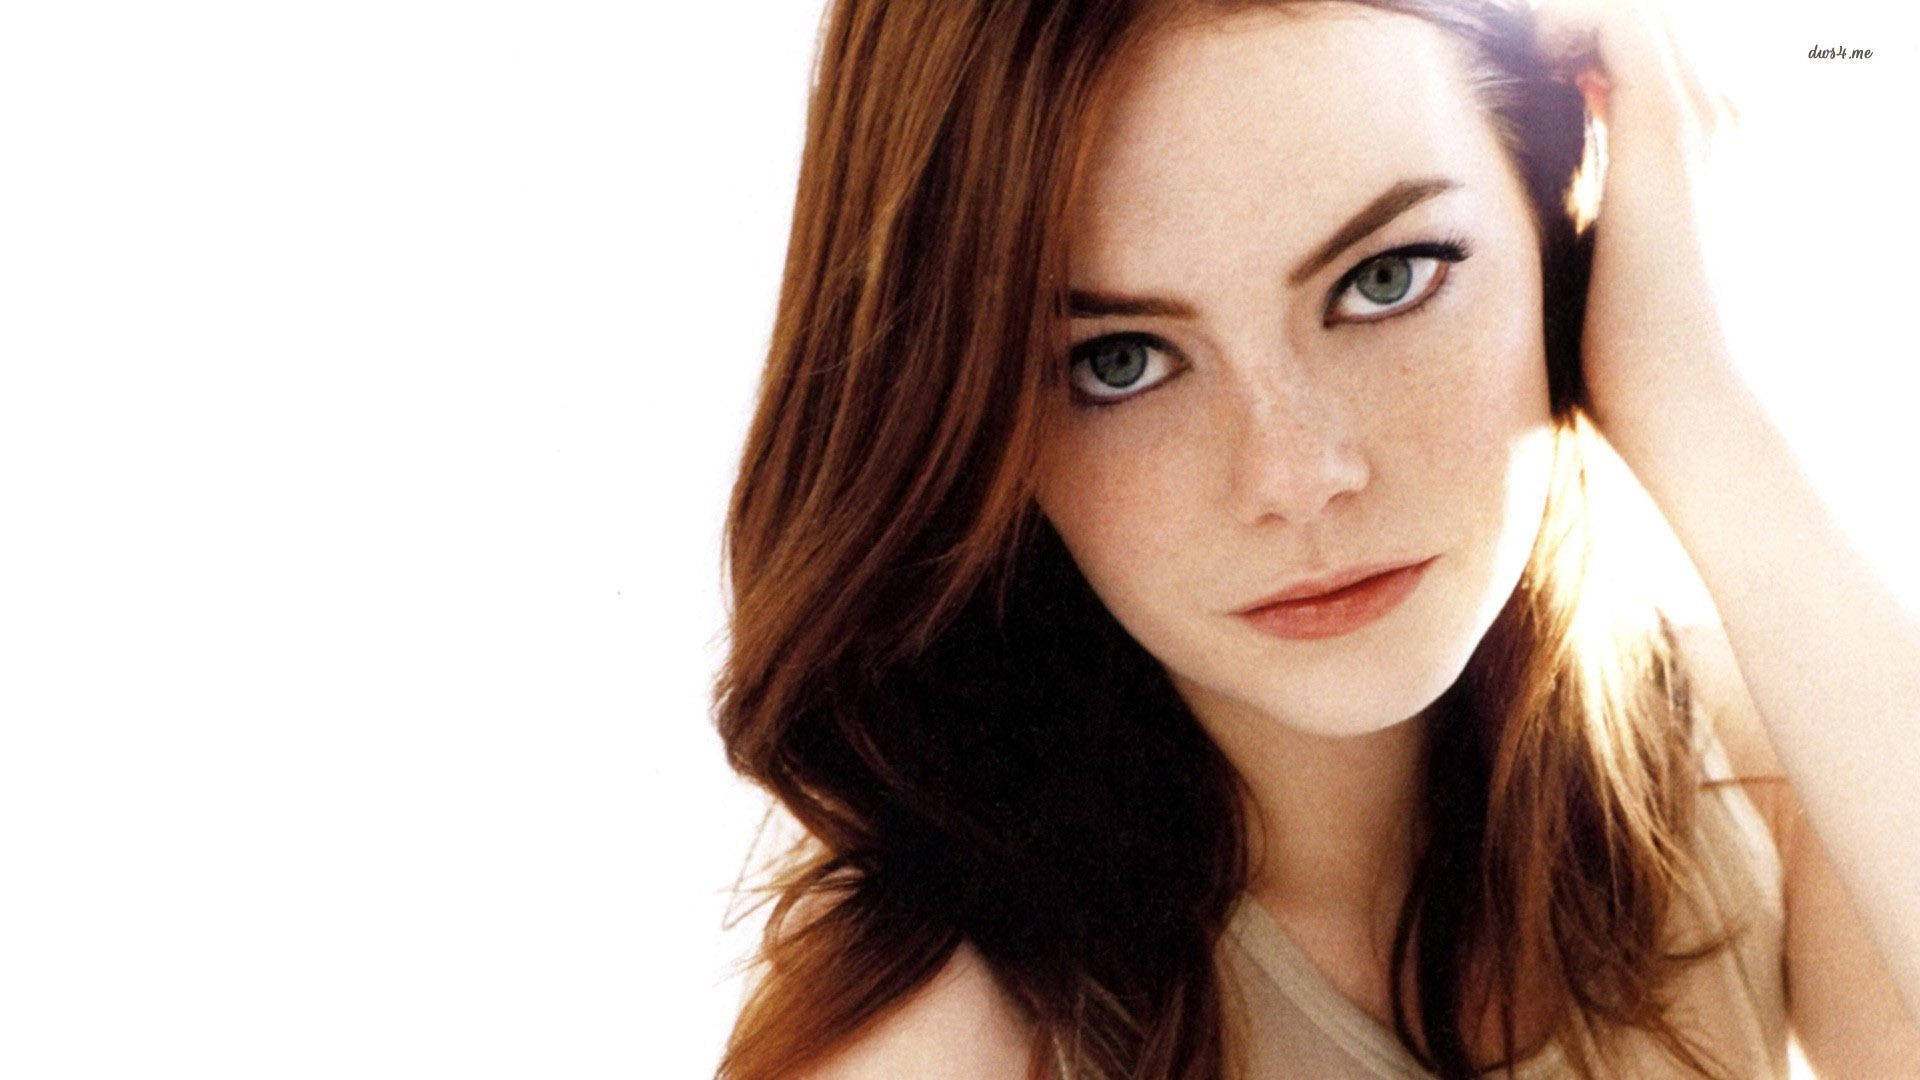 Gorgeous Emma Stone in a close-up shot Wallpaper